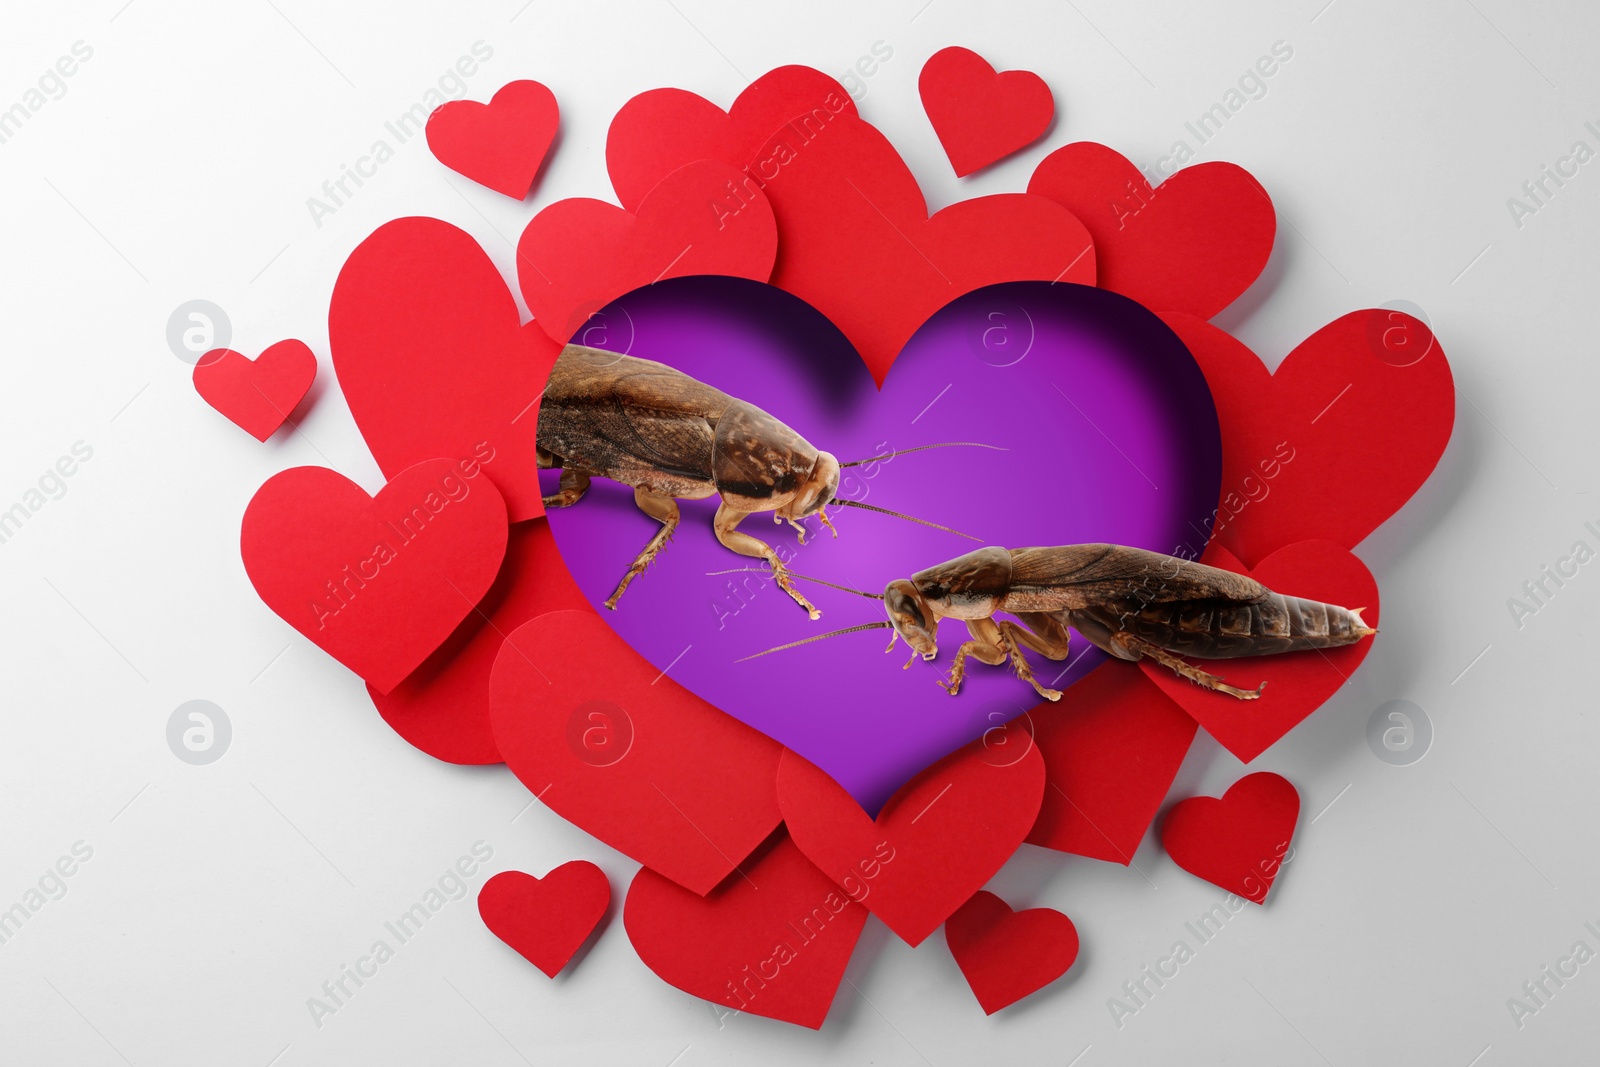 Image of Valentine's Day Promotion Name Roach - QUIT BUGGING ME. Cockroaches on purple background, view through cut out heart from paper